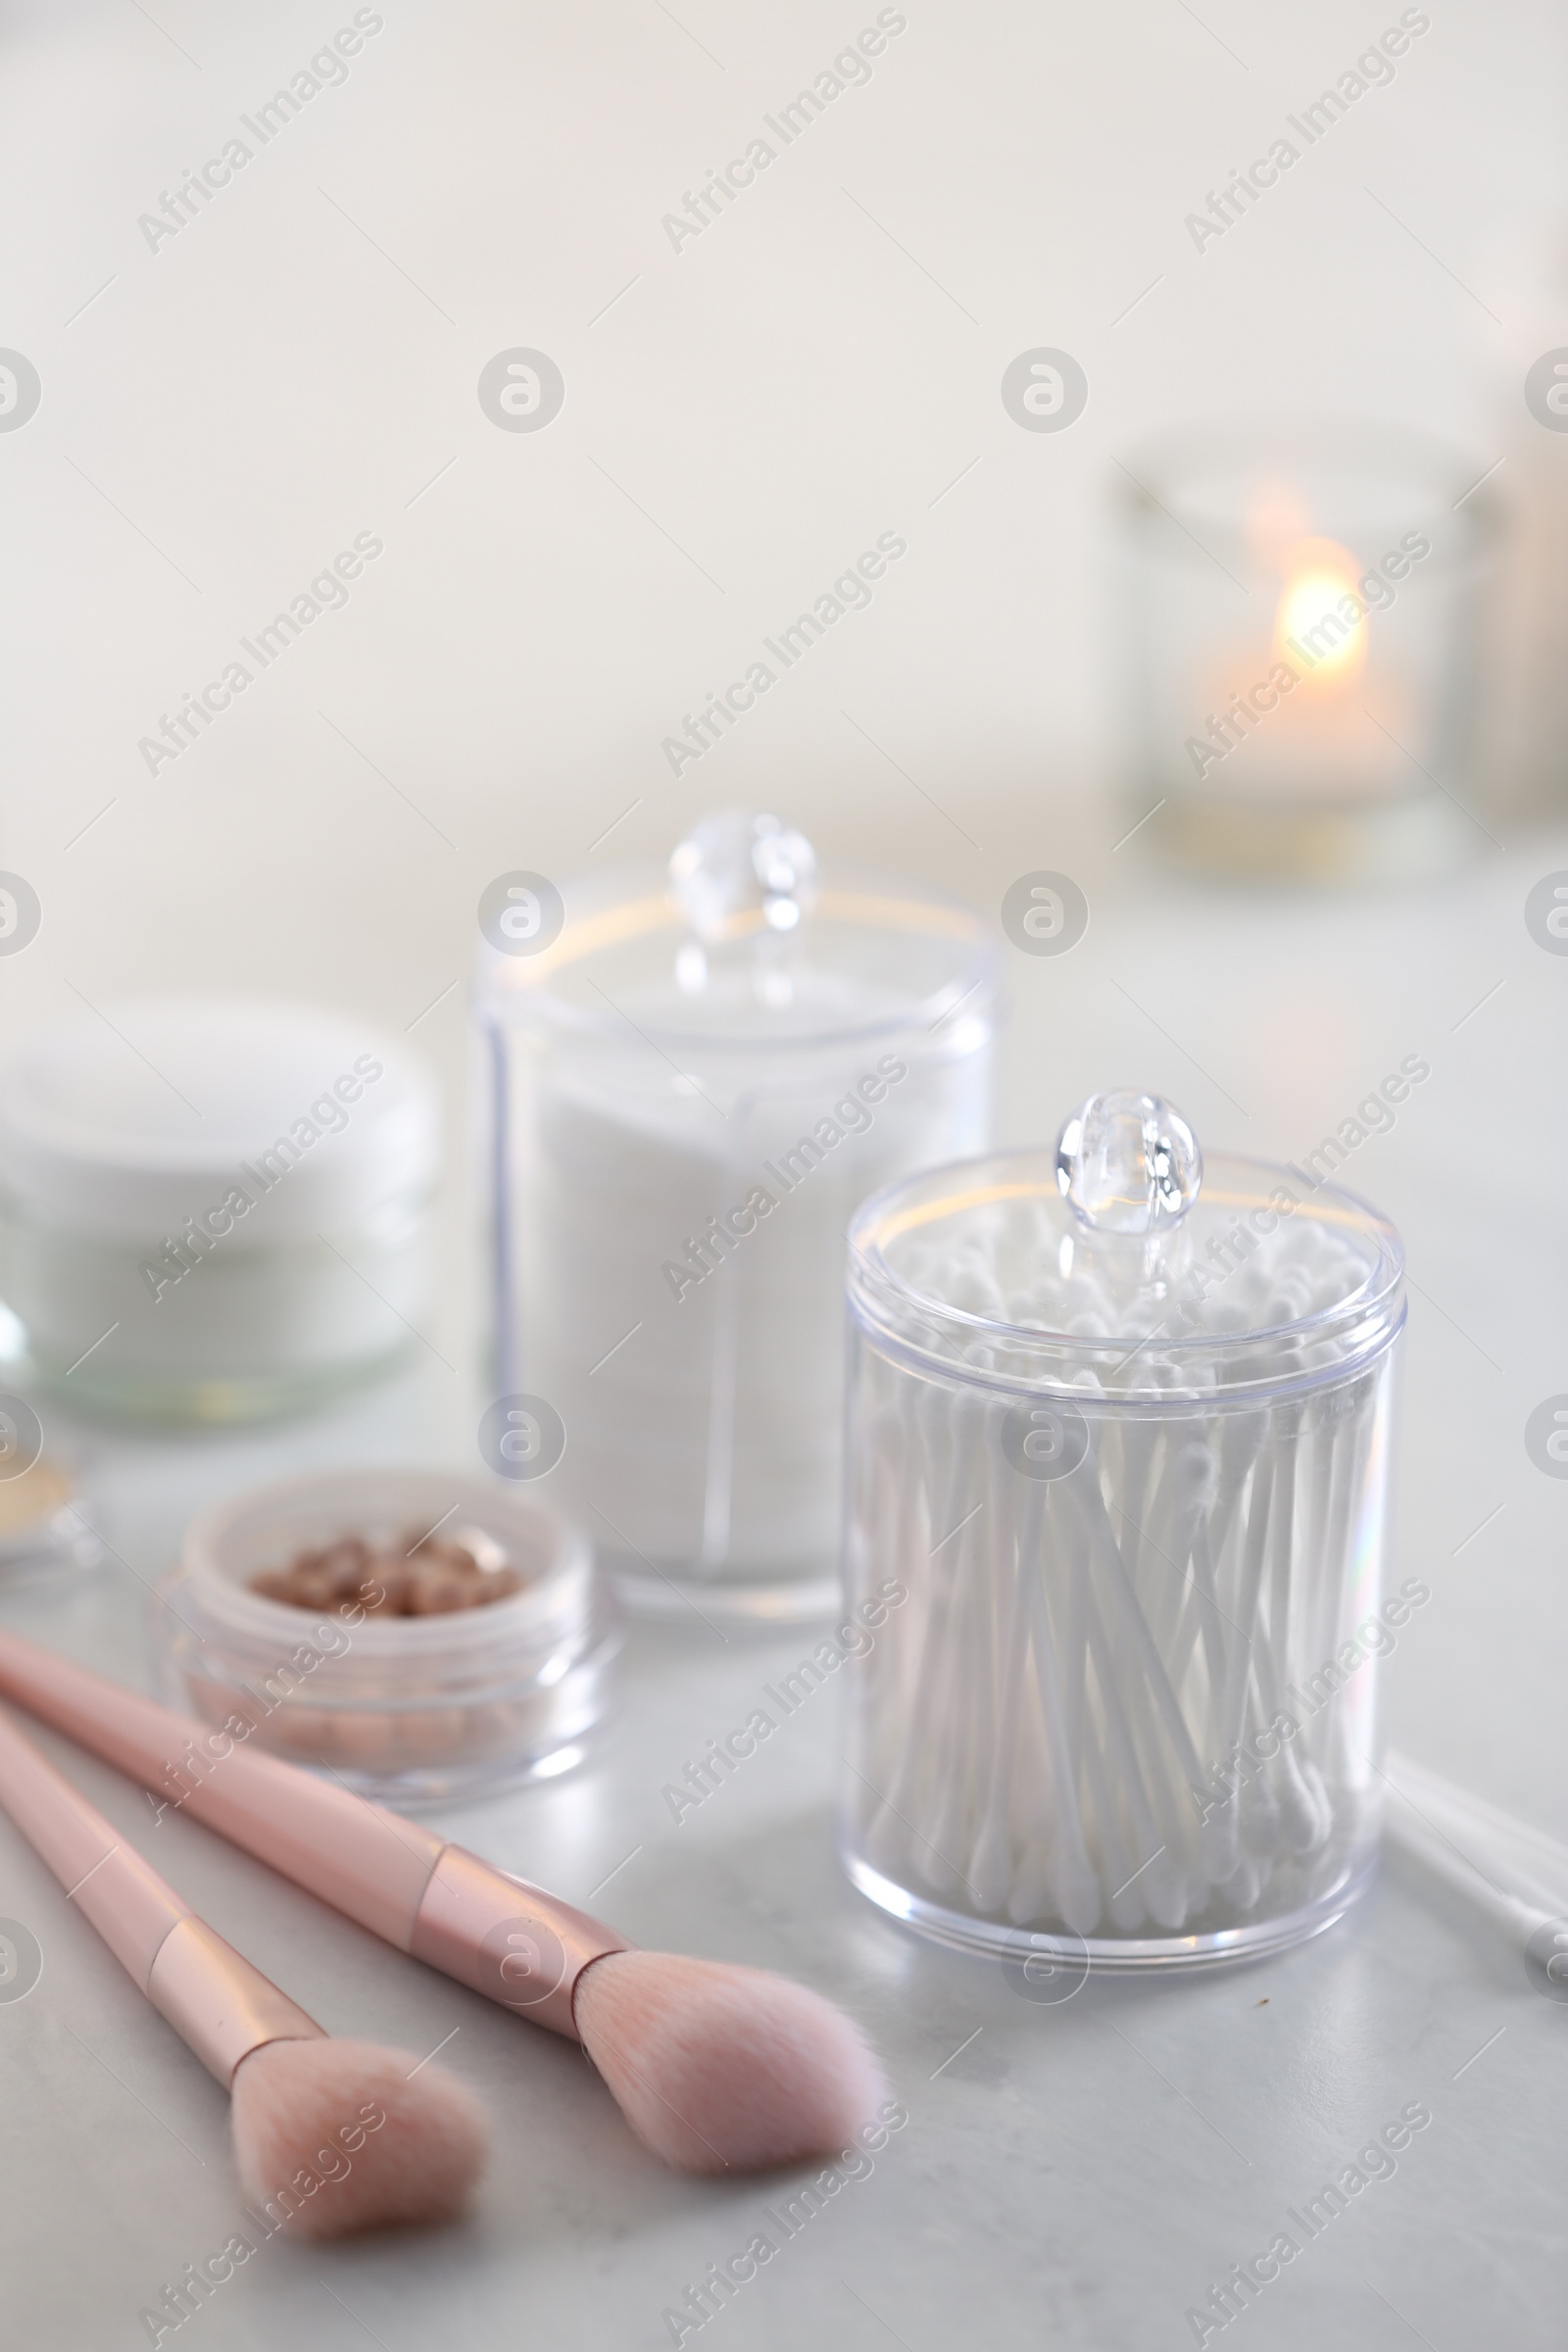 Photo of Cotton buds and pads in transparent holders near makeup brushes on table indoors